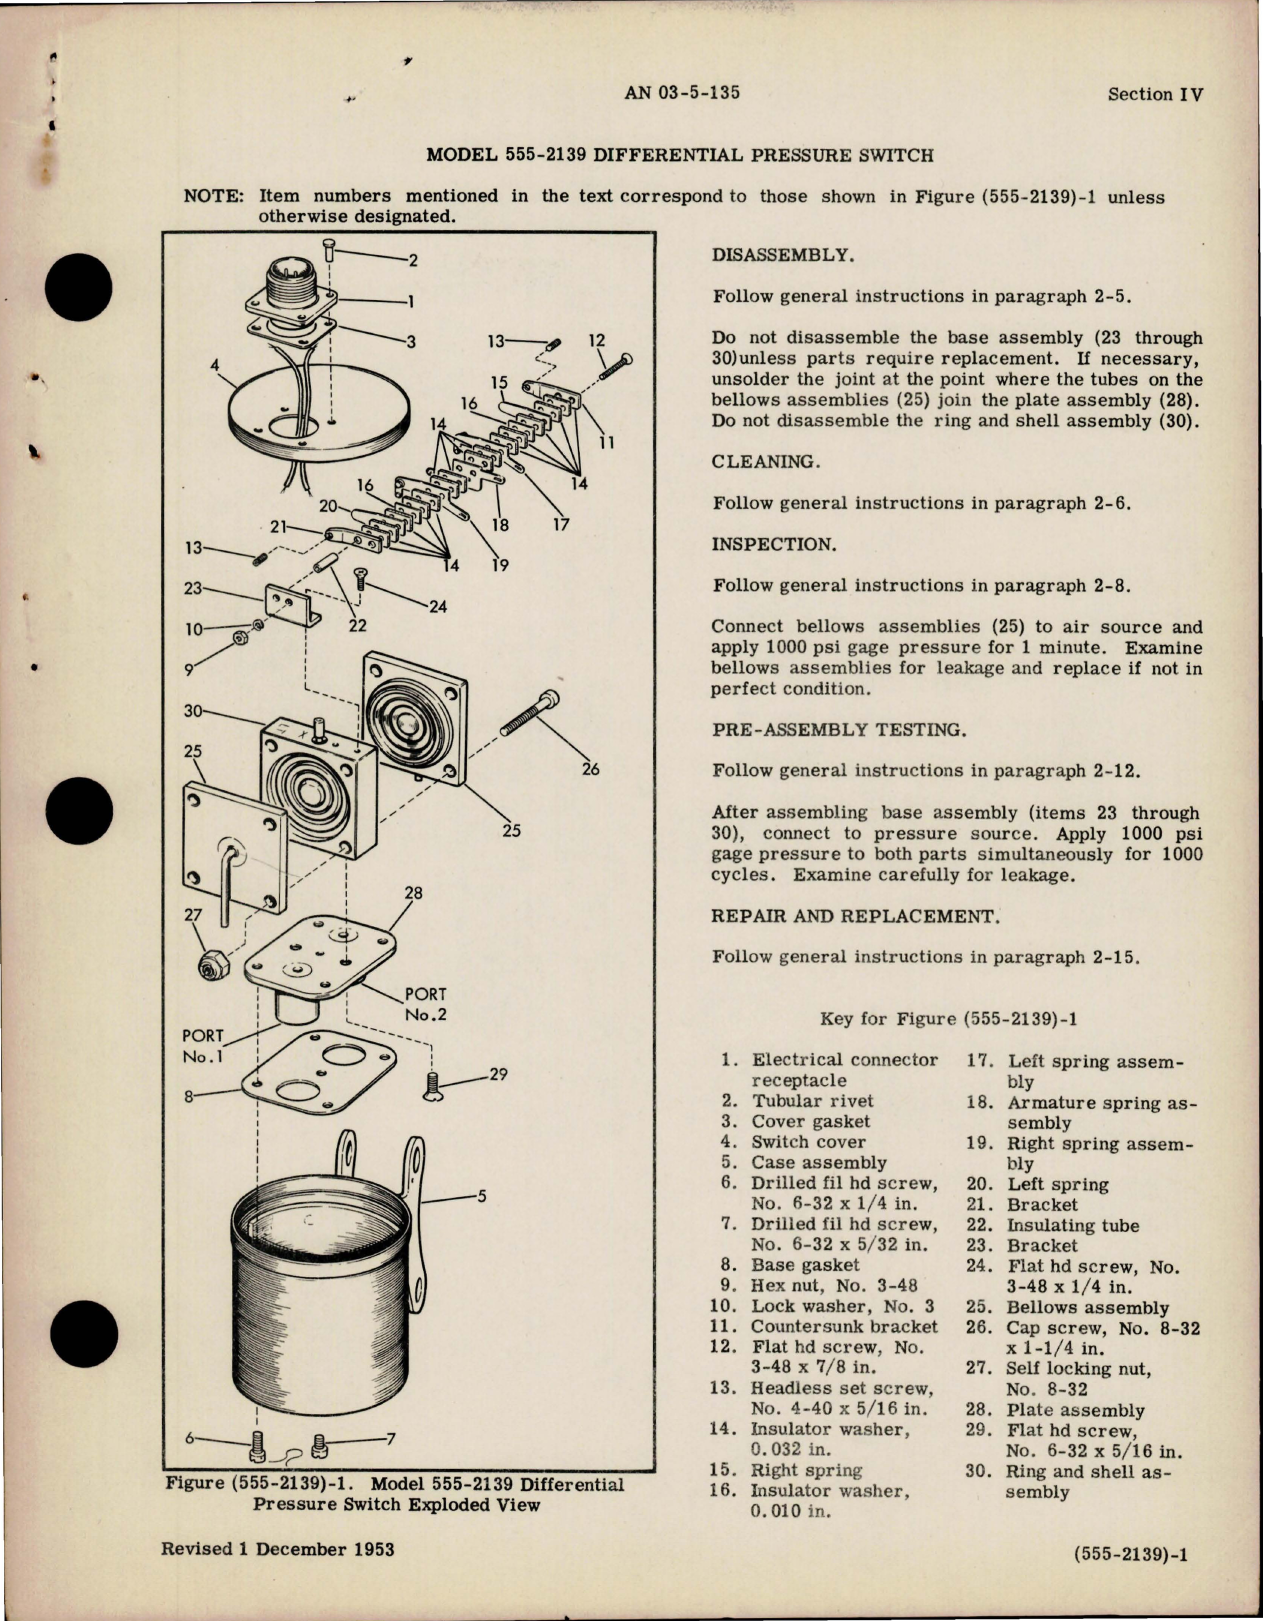 Sample page 5 from AirCorps Library document: Overhaul Instructions for Pressure Control Switches